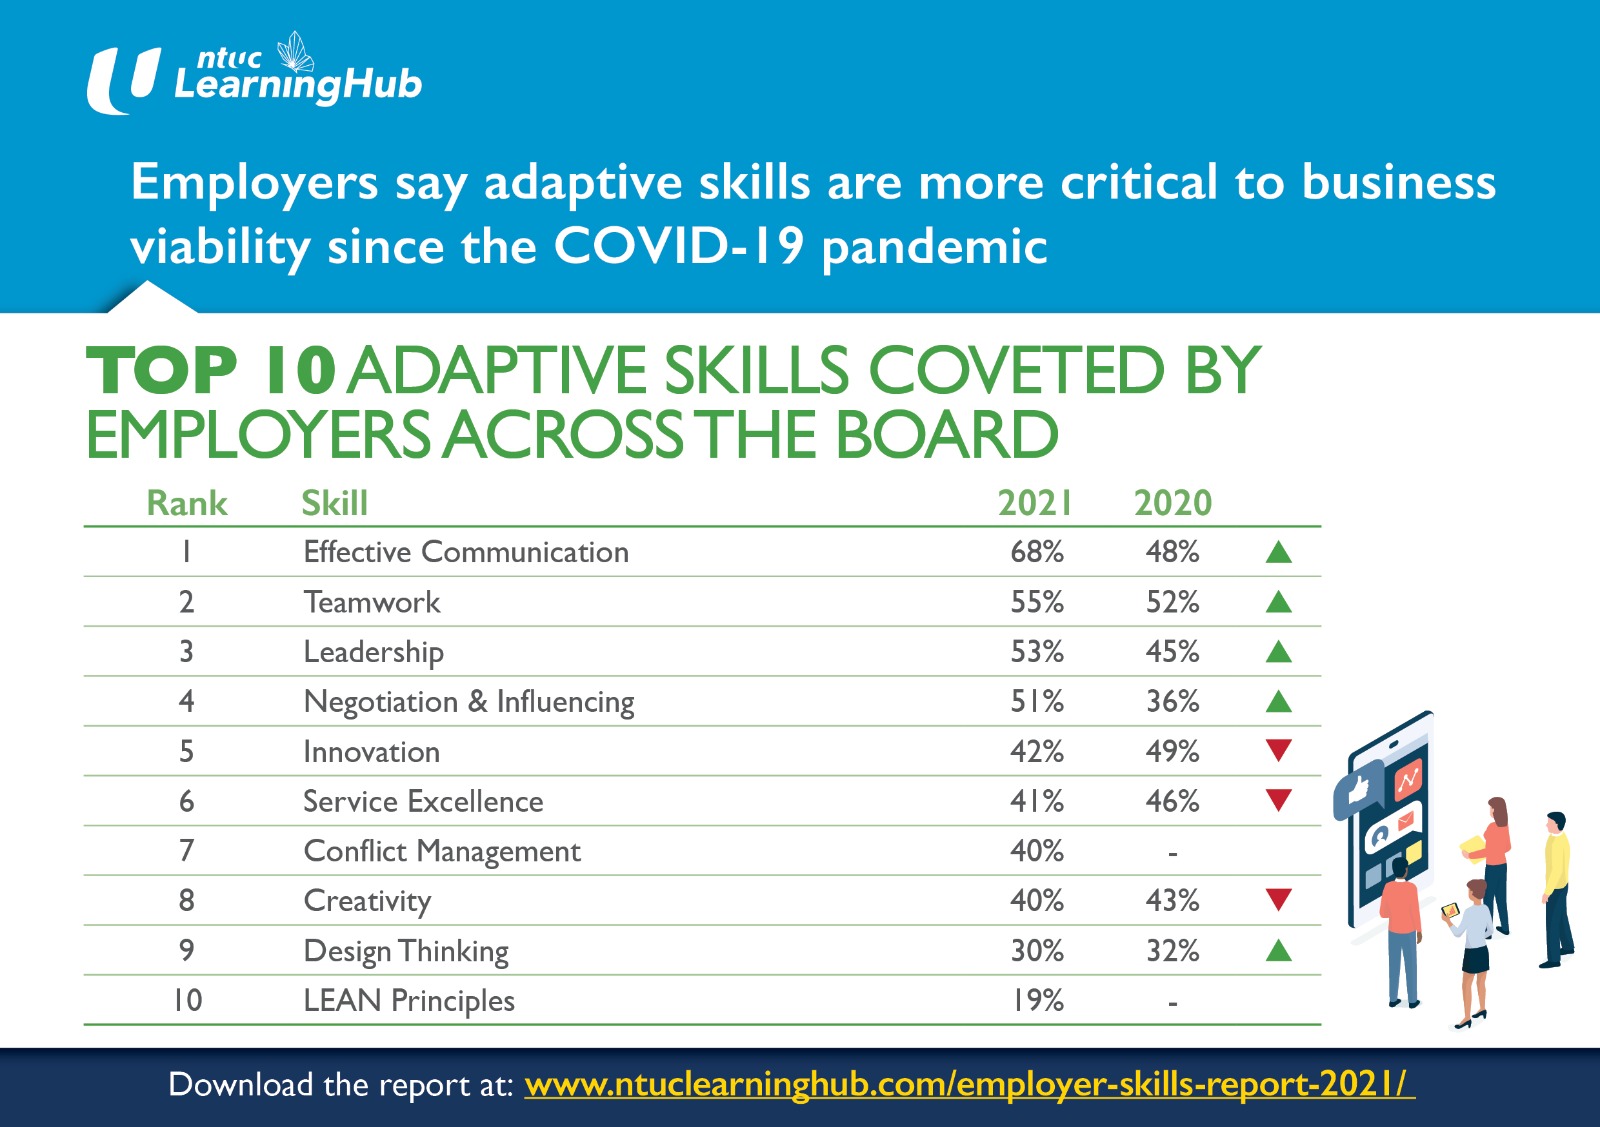 Employers Say Adaptive Skills More Critical To Business Viability Since Covid-19 Pandemic: NTUC LearningHub Survey